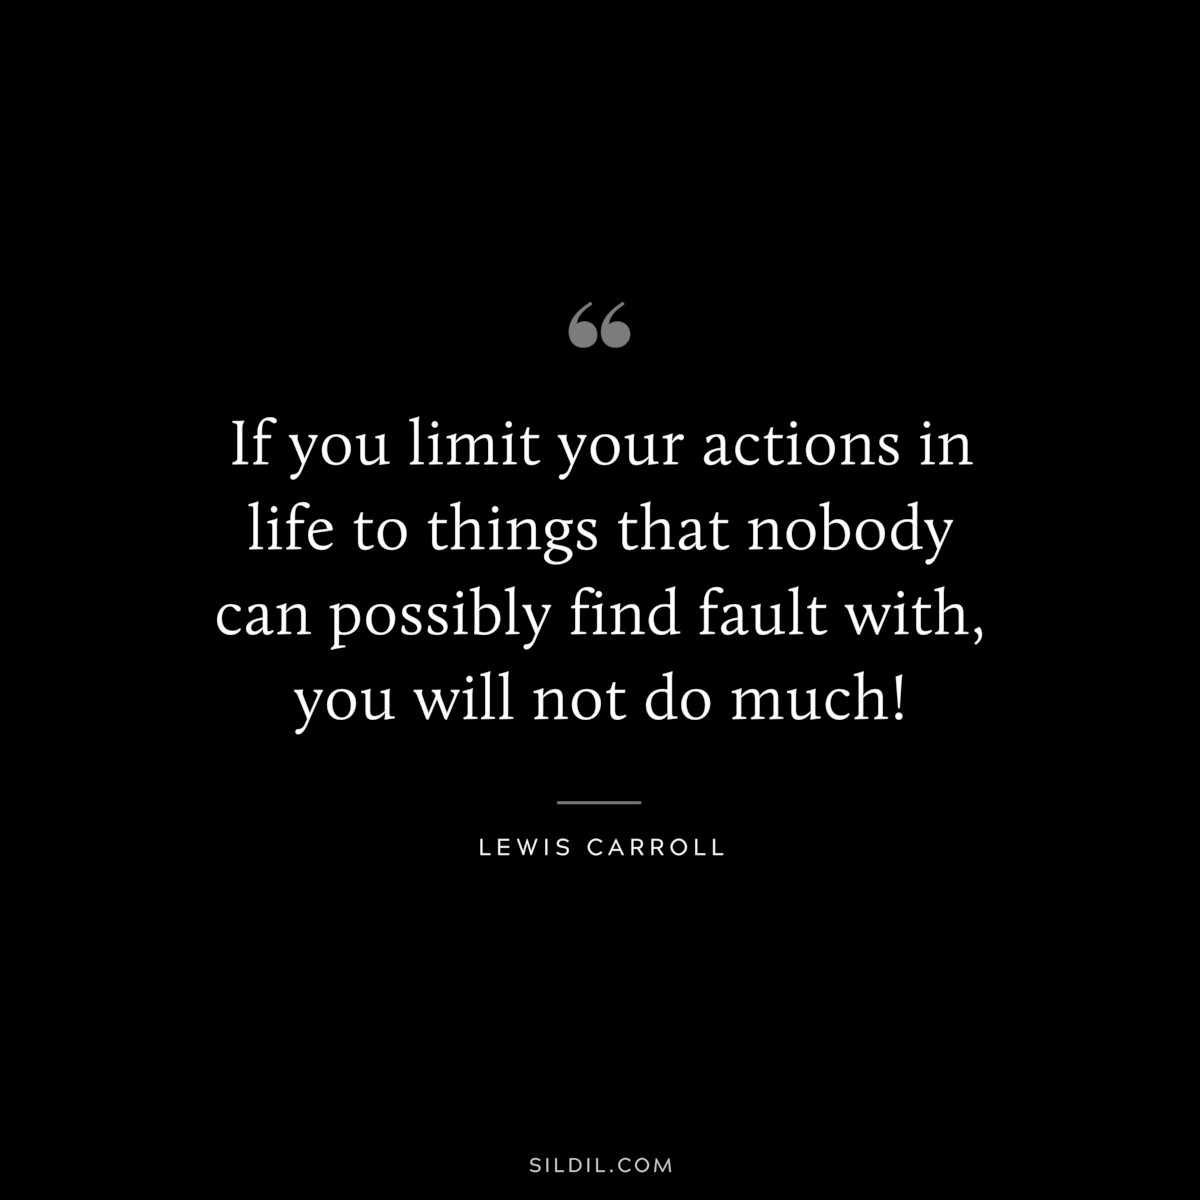 If you limit your actions in life to things that nobody can possibly find fault with, you will not do much!